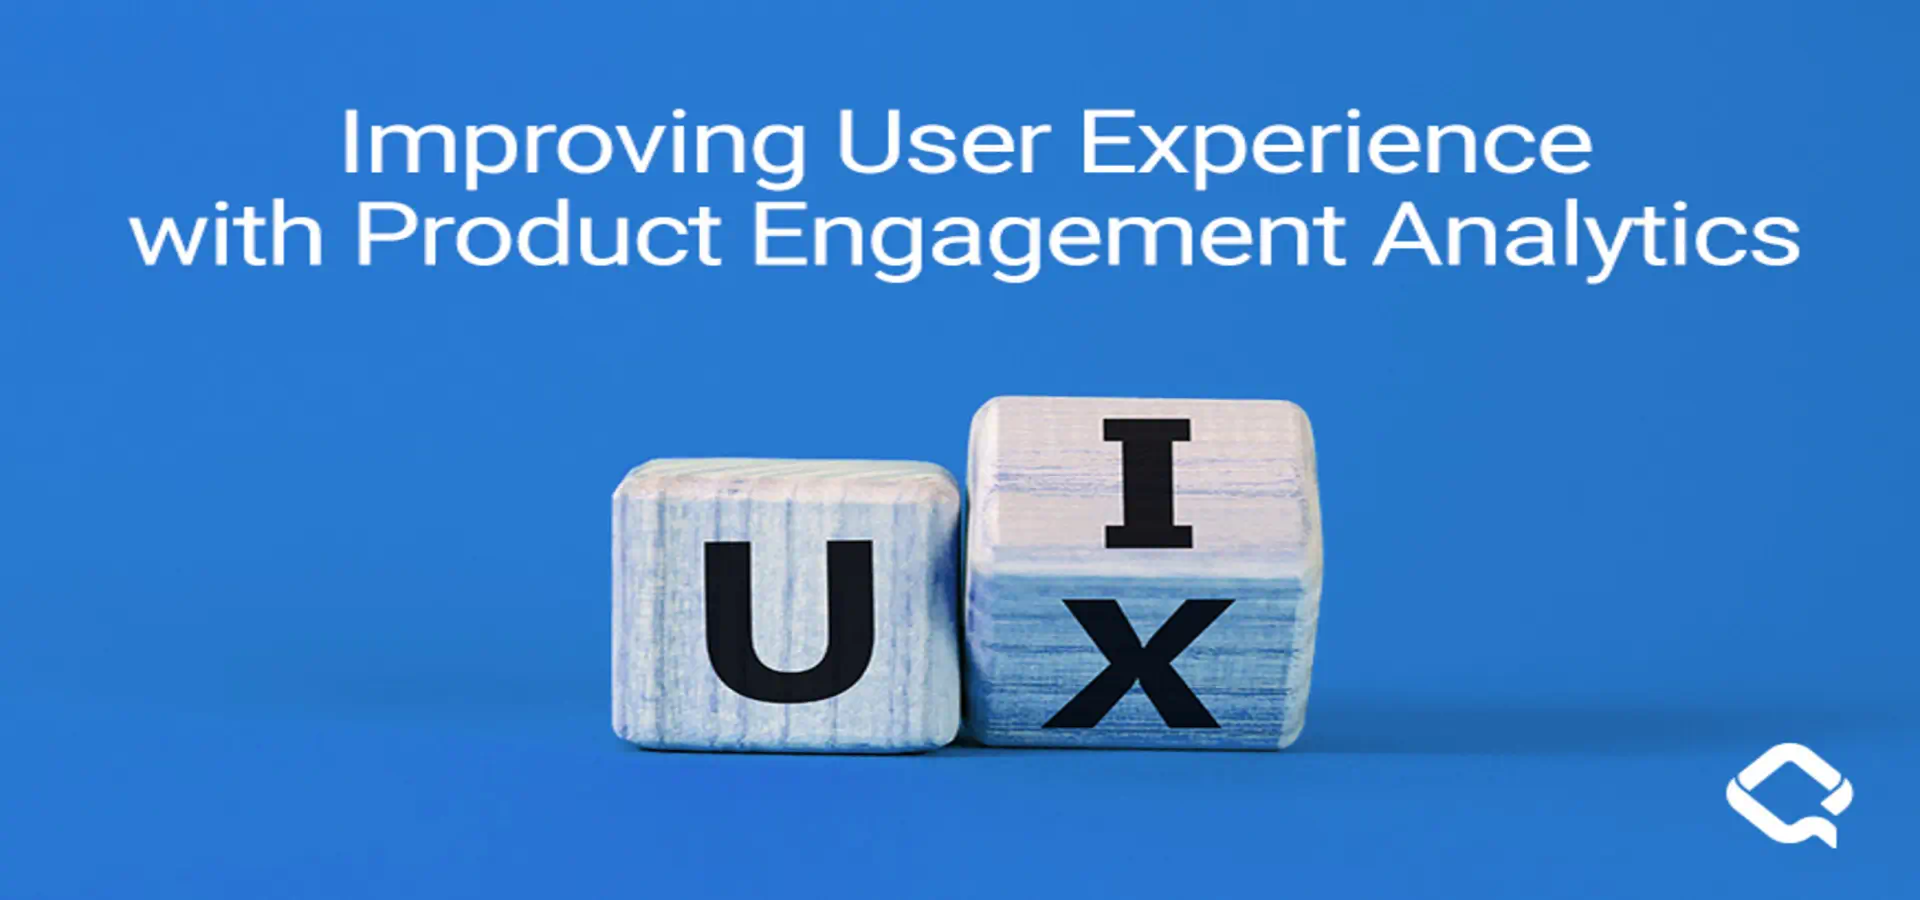 About Quorum - Improving User Experience With Product Engagement Analytics